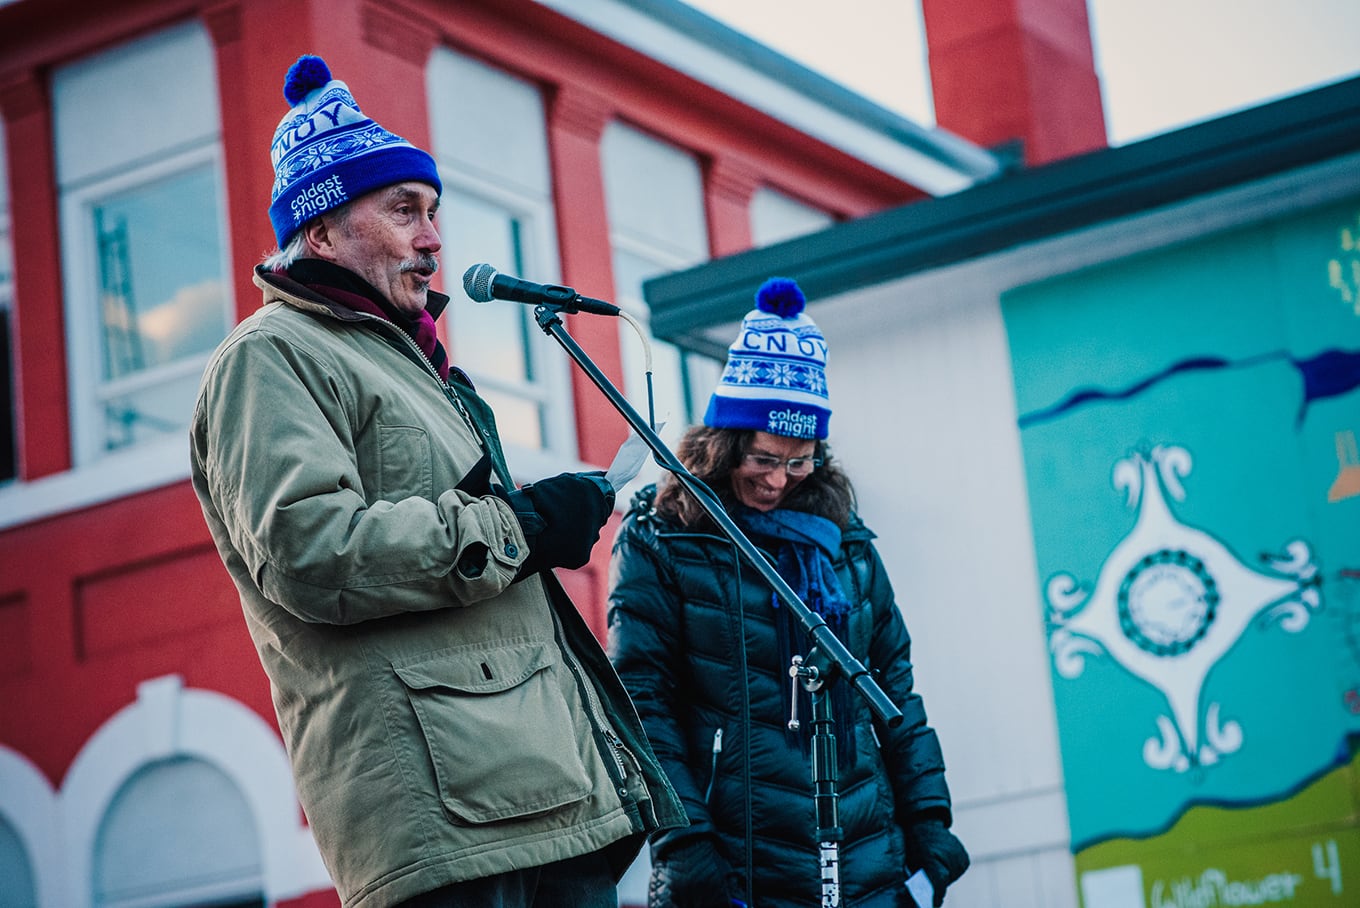 Nelson Cares preps for 9th annual Coldest Night of the Year